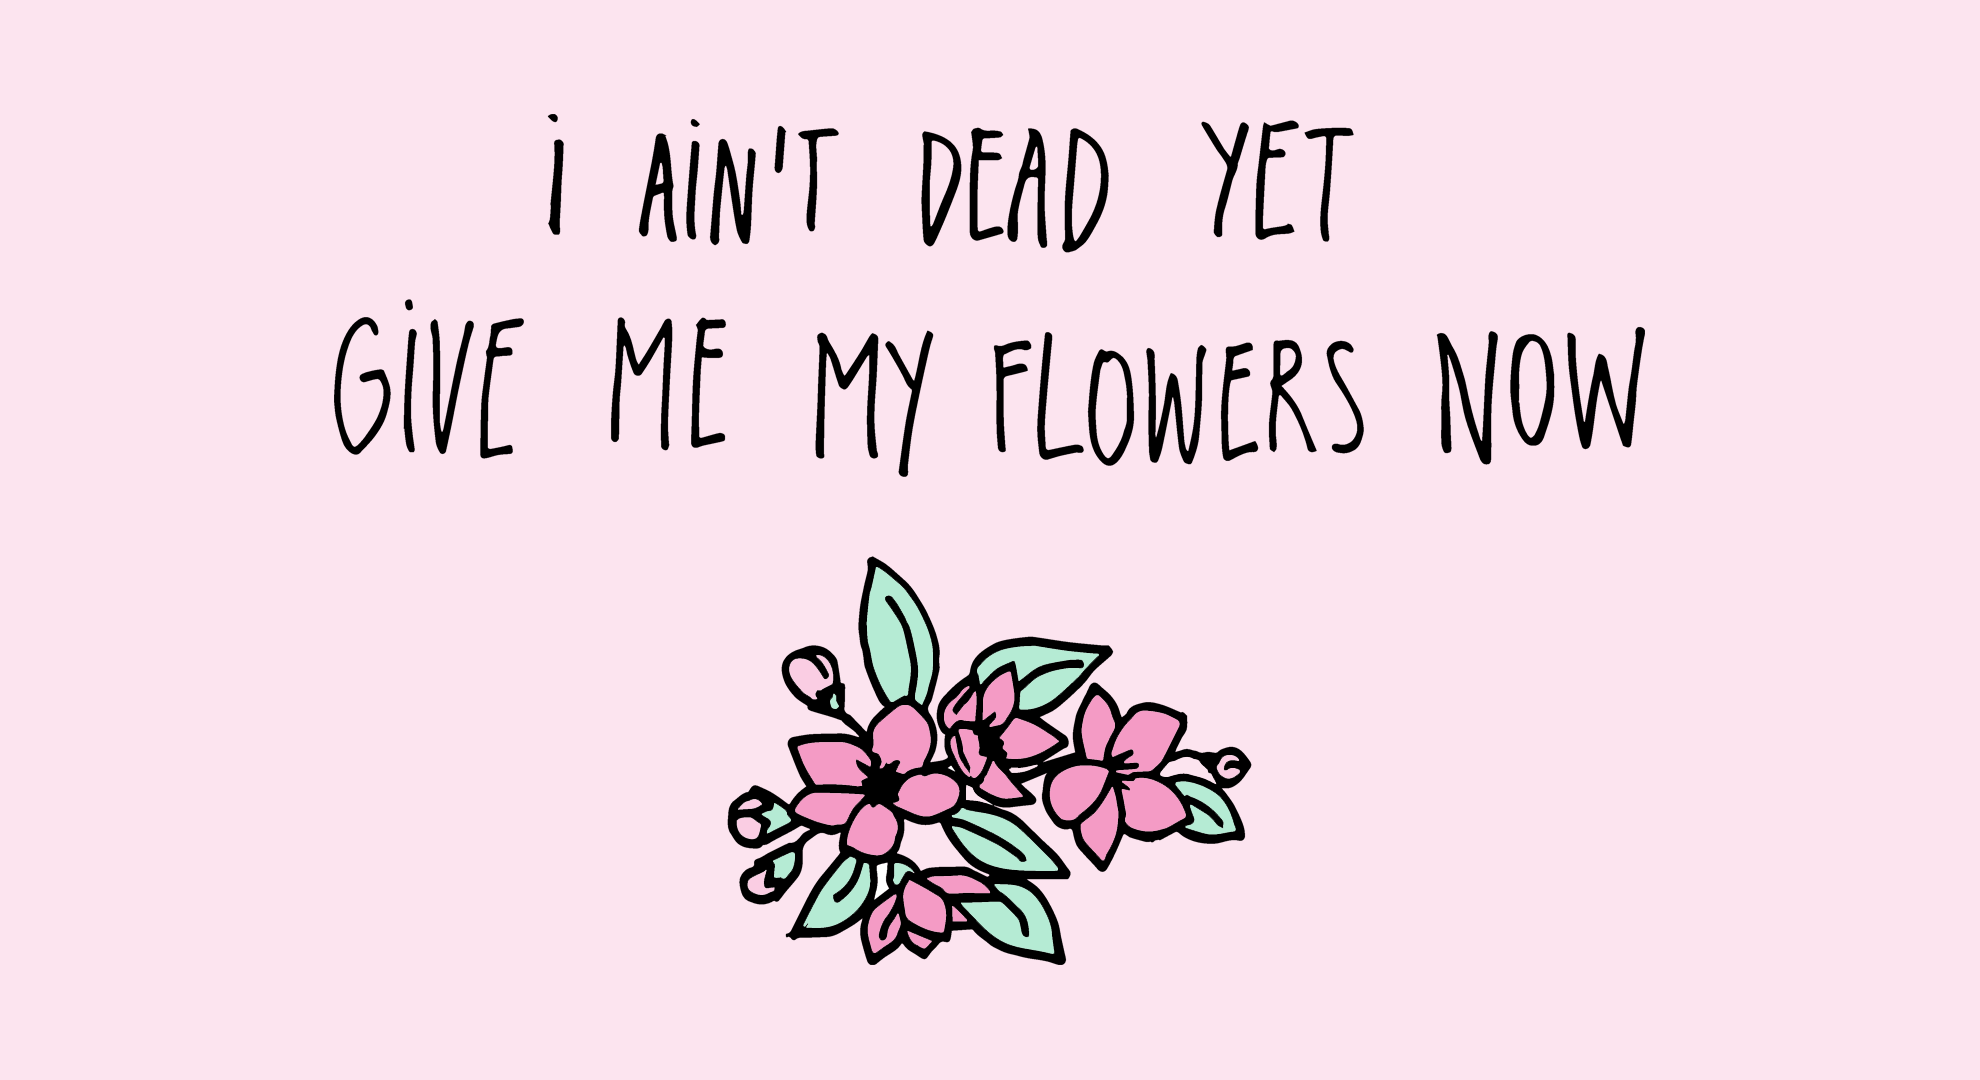 An illustration of flowers with the text 